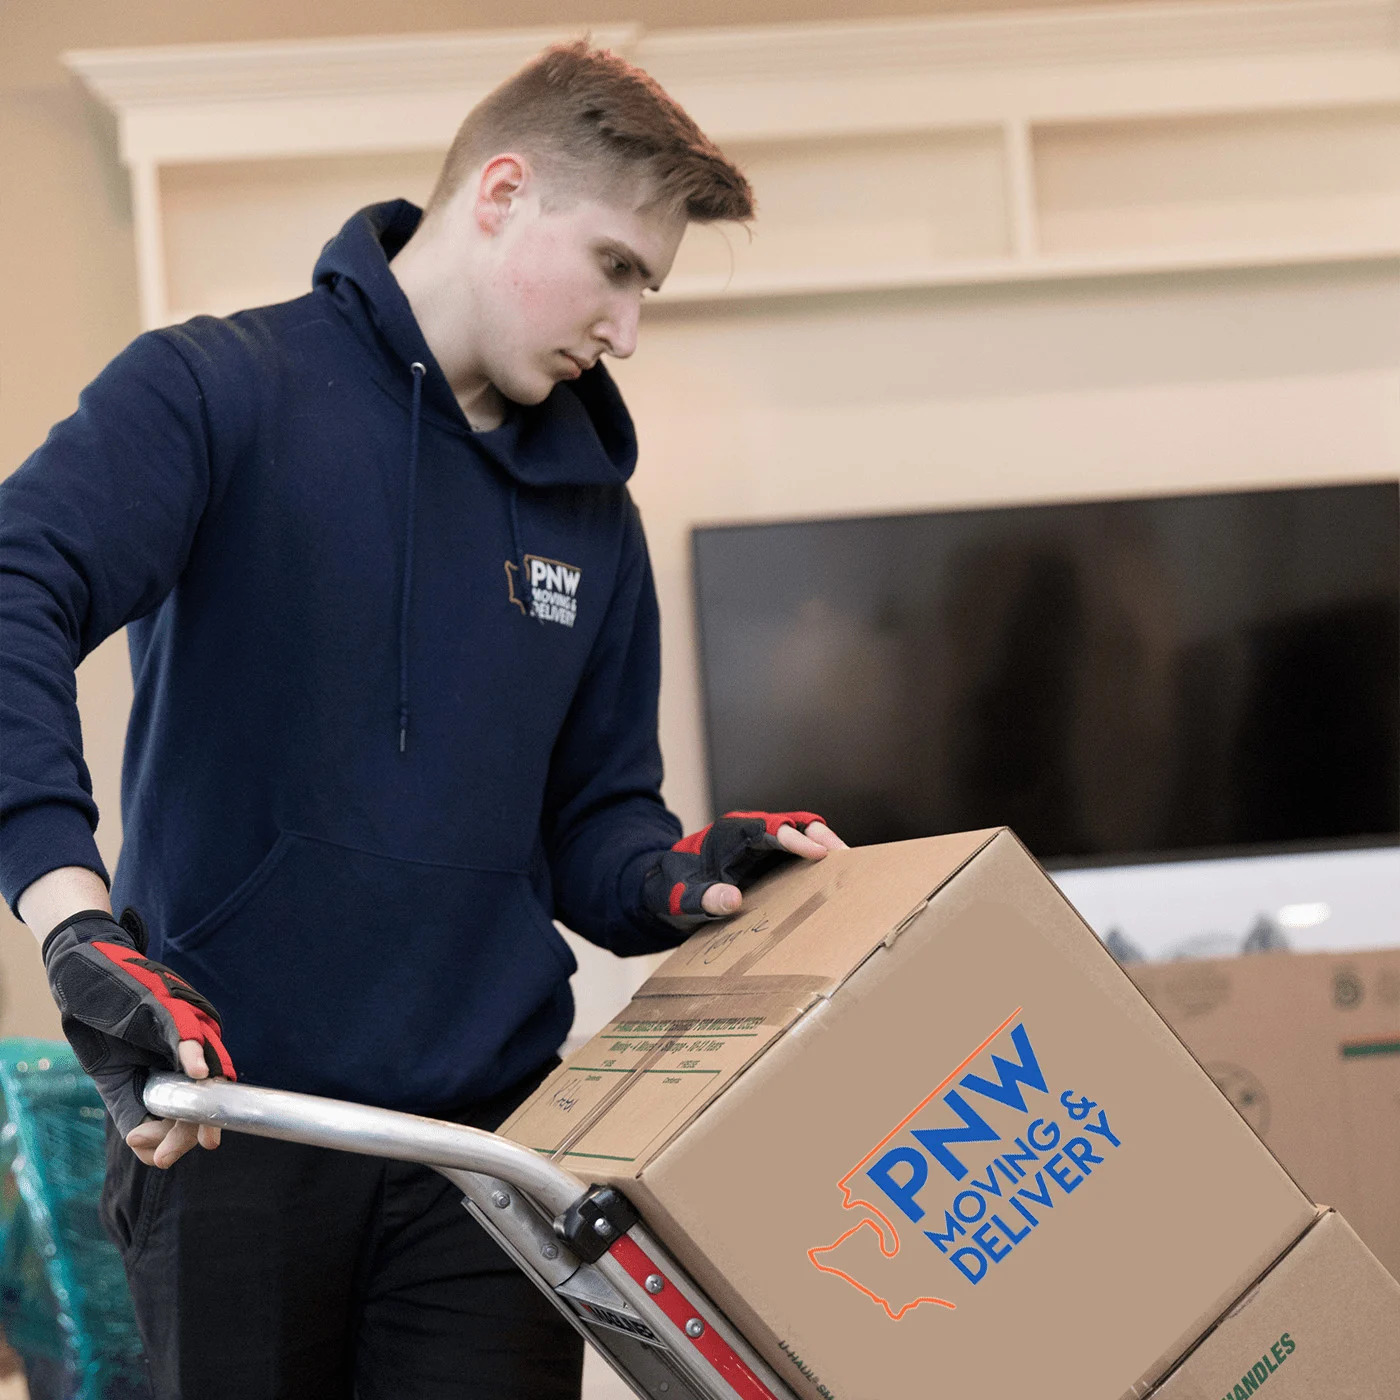 PNW Moving and Delivery is a family-owned and operated business in Tacoma, Washington.